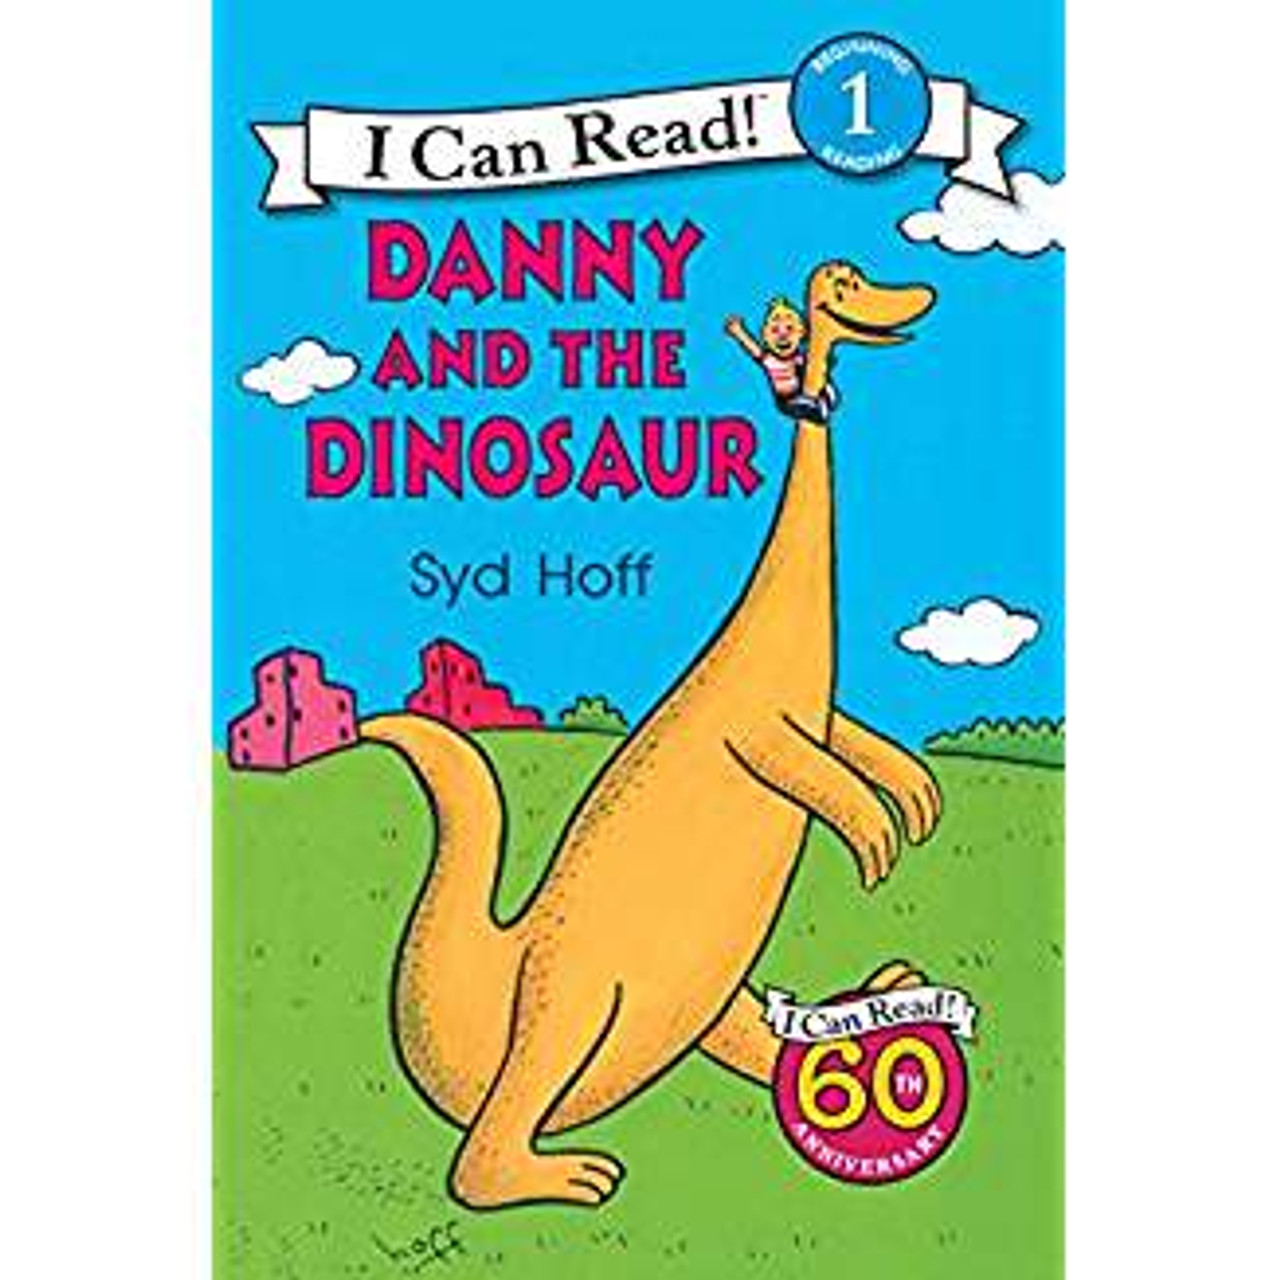  Danny loves dinosaurs. When he sees one at the museum, he thinks aloud that it would be nice to play with one. When a dinosaur answers Danny, they have a wonderful adventure together.